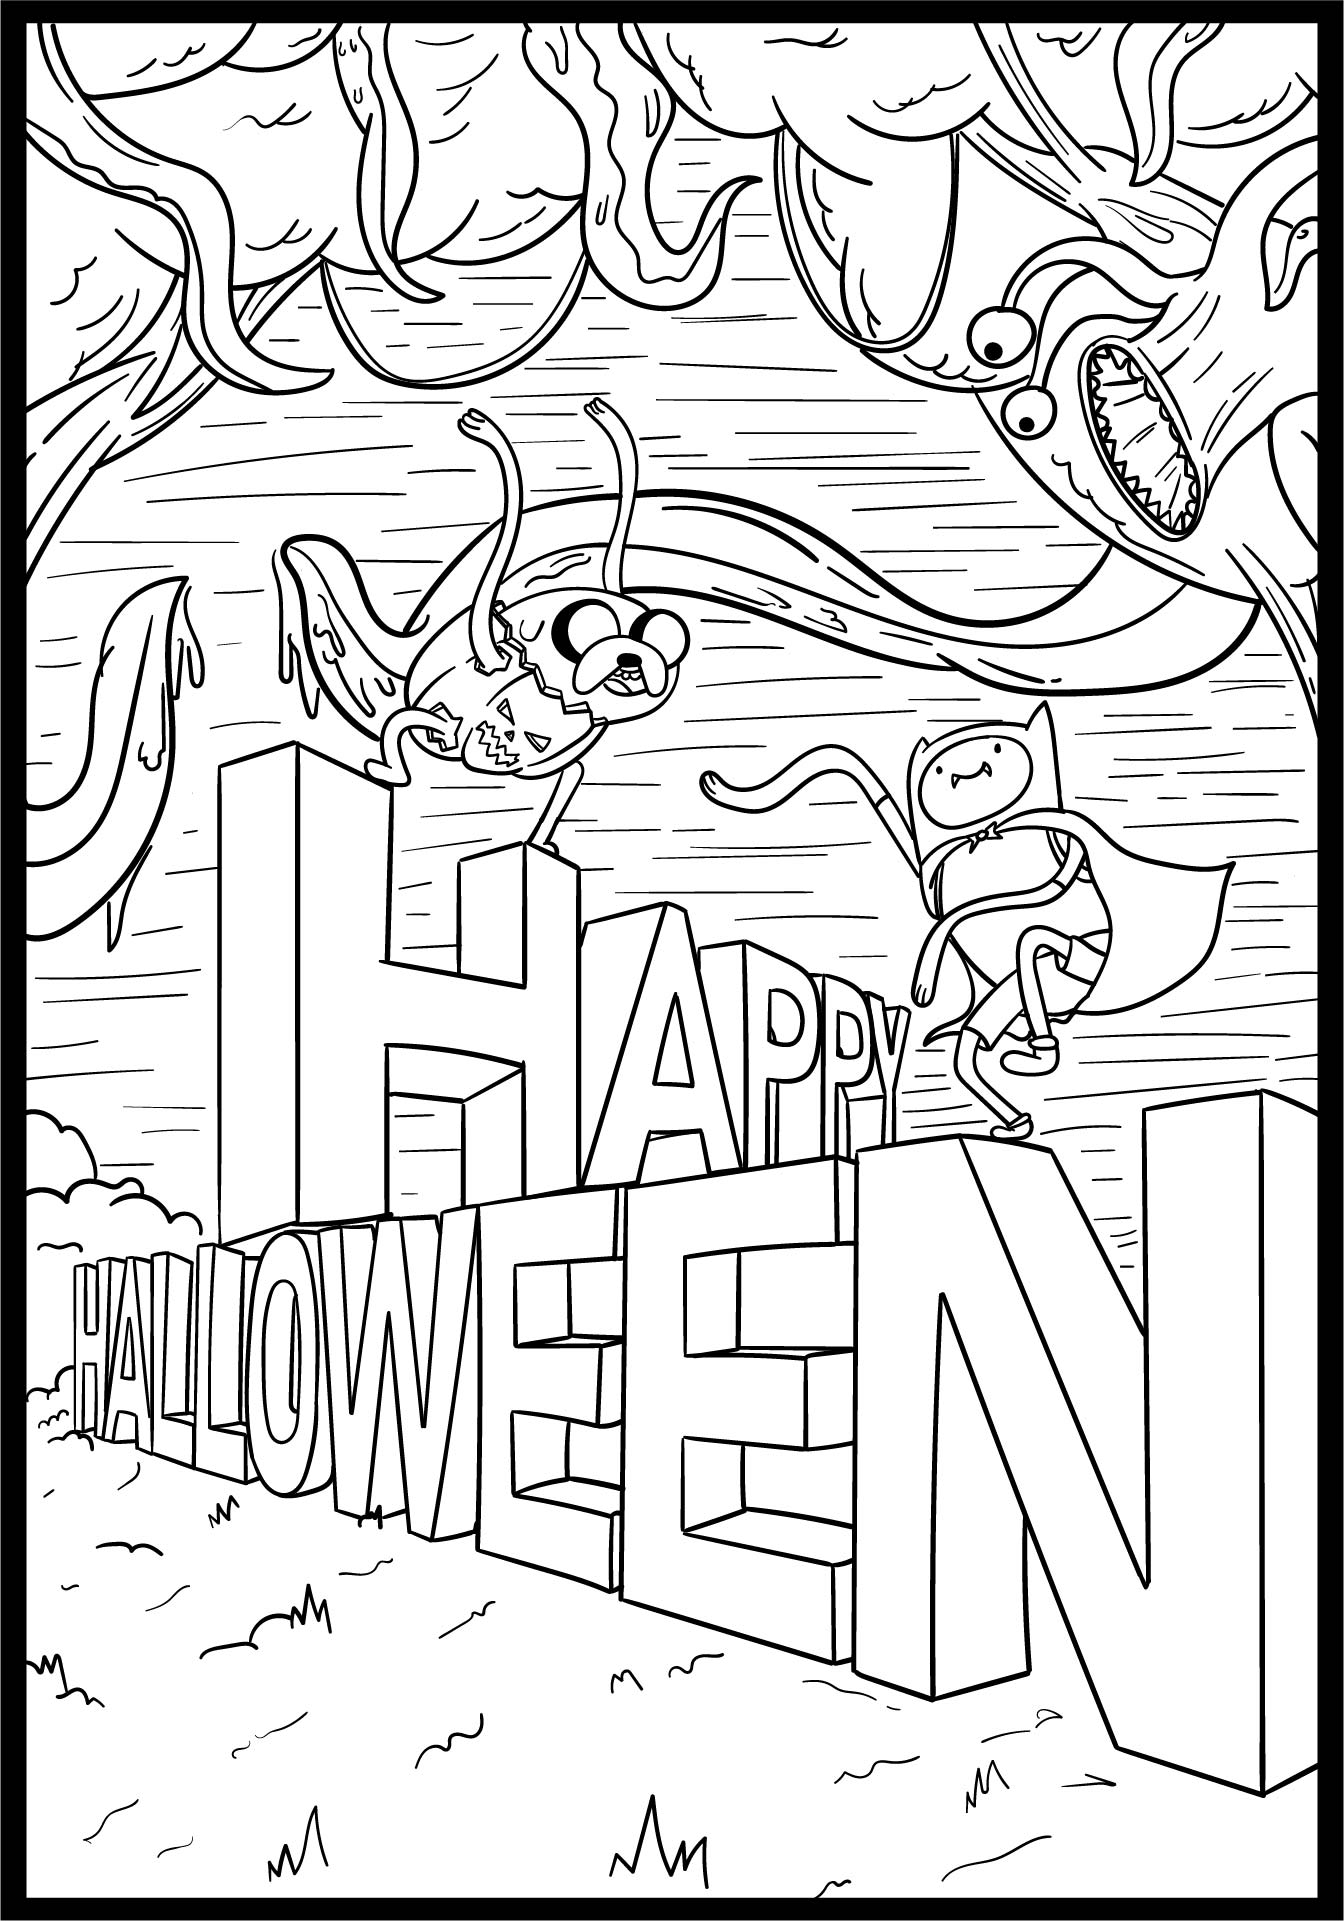 Printable Halloween Images Coloring